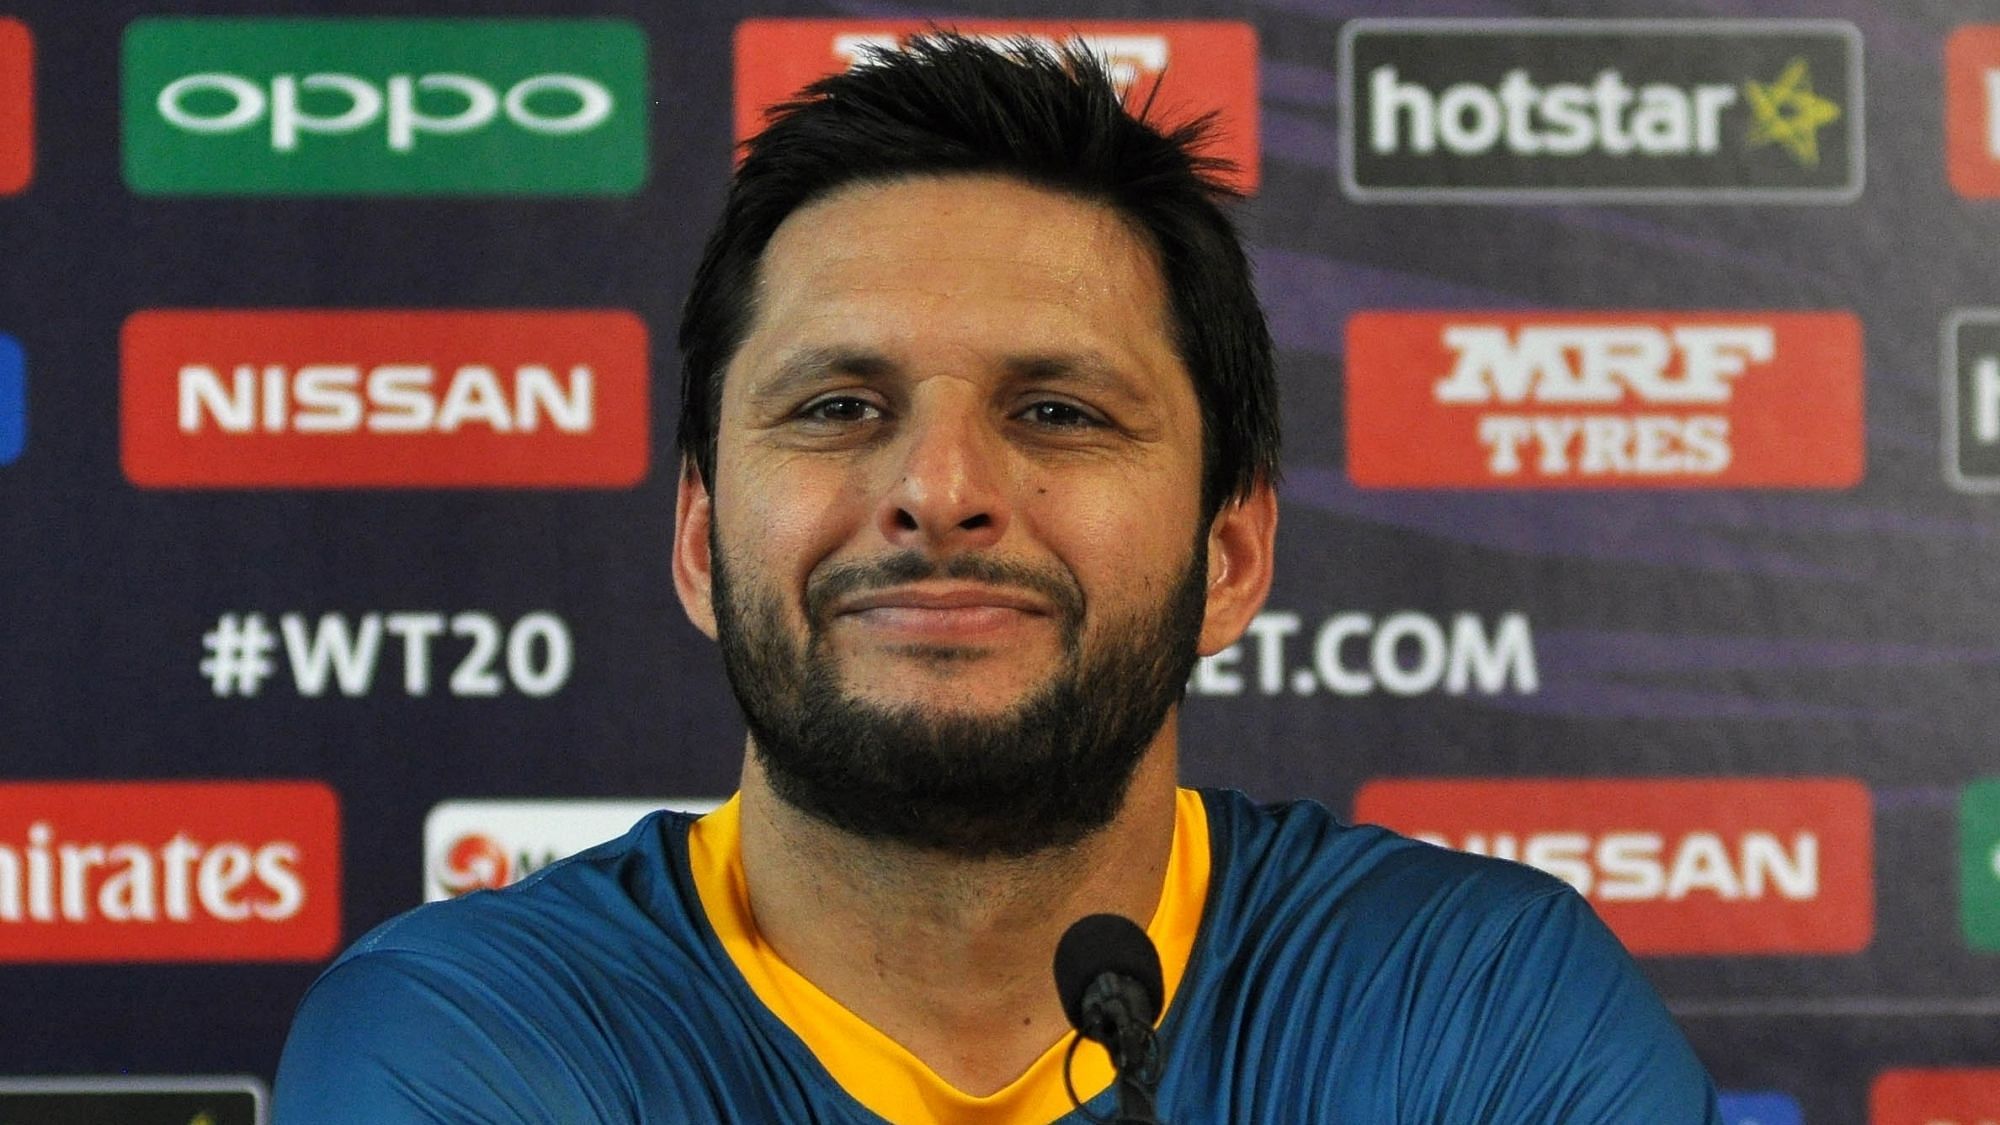 Former Pakistan captain Shahid Afridi thanked everybody for their wishes on his speedy recovery after he revealed that he has tested positive for coronavirus.